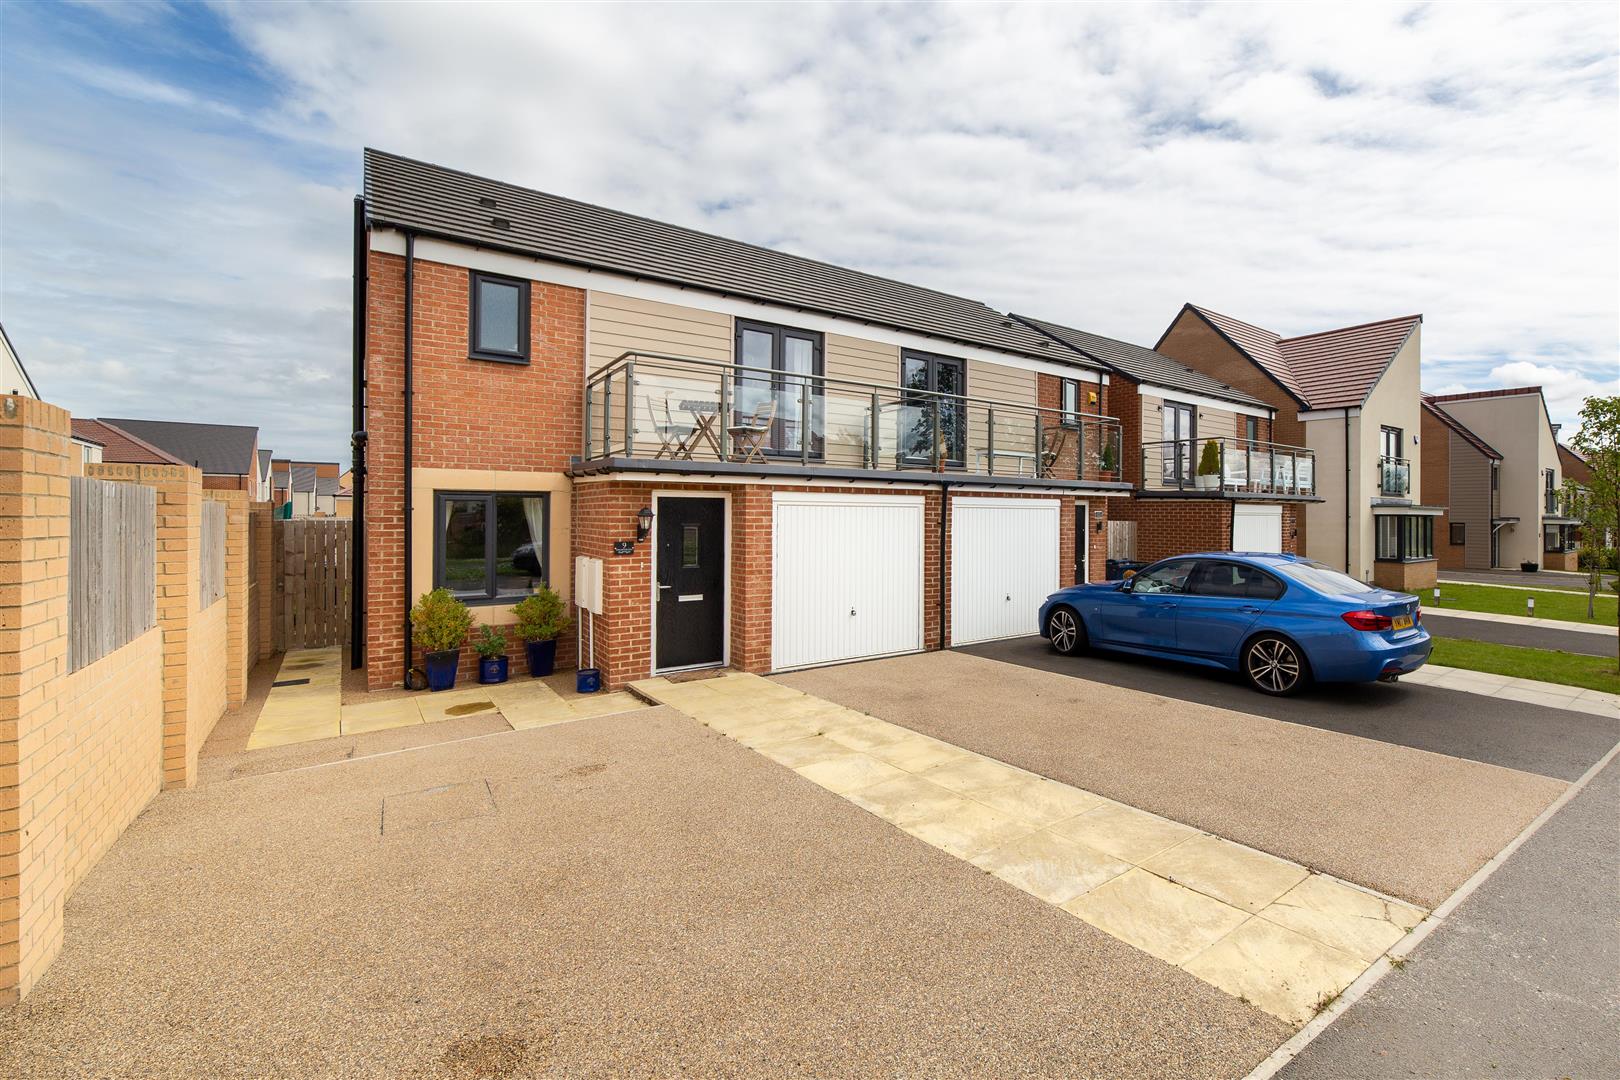 3 bed semi-detached house for sale in Elmwood Park Grove, Great Park  - Property Image 1